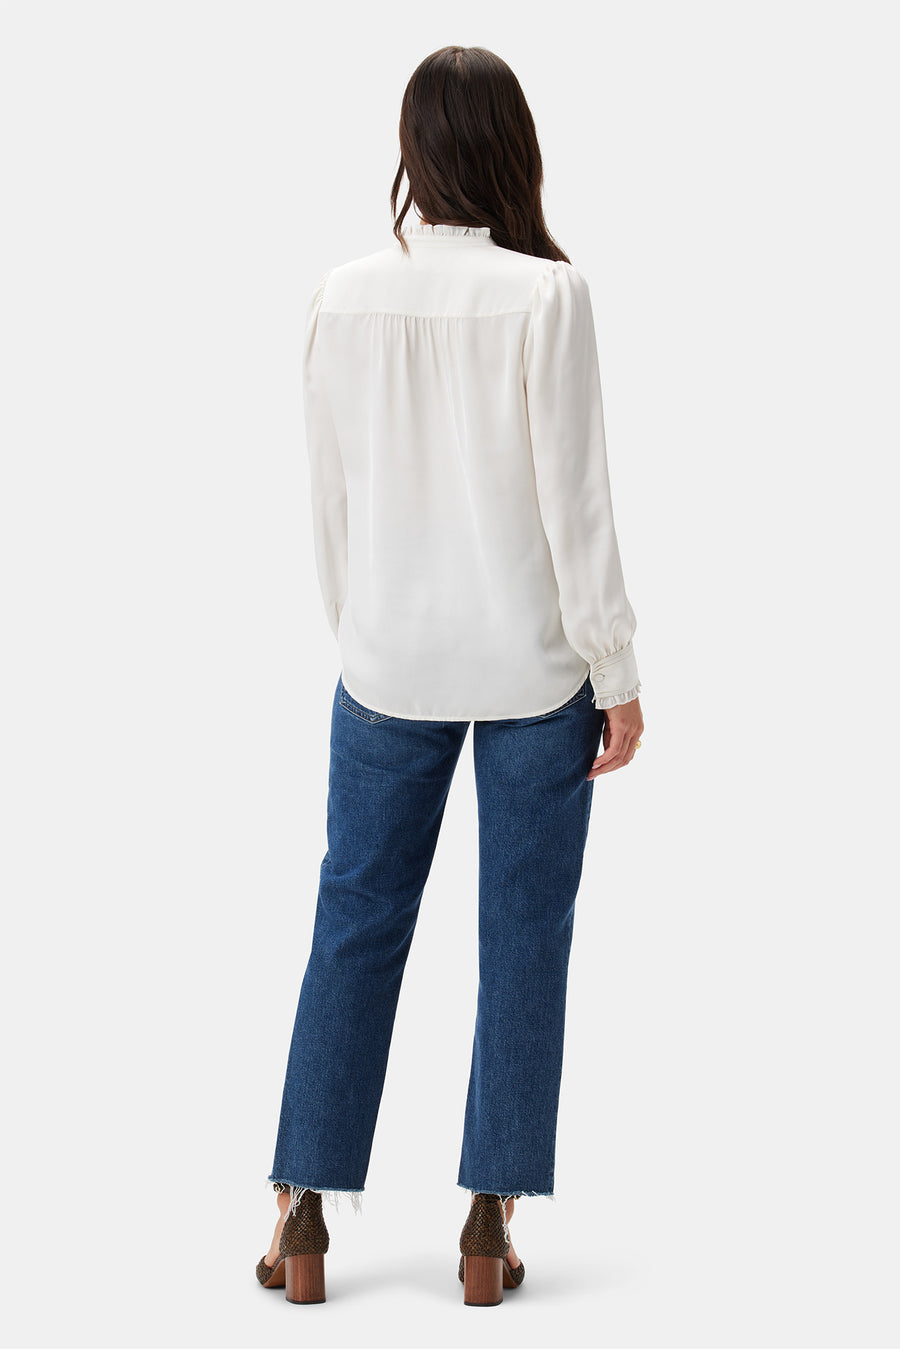 Charlotte Recycled Polyester Blouse - Ivory